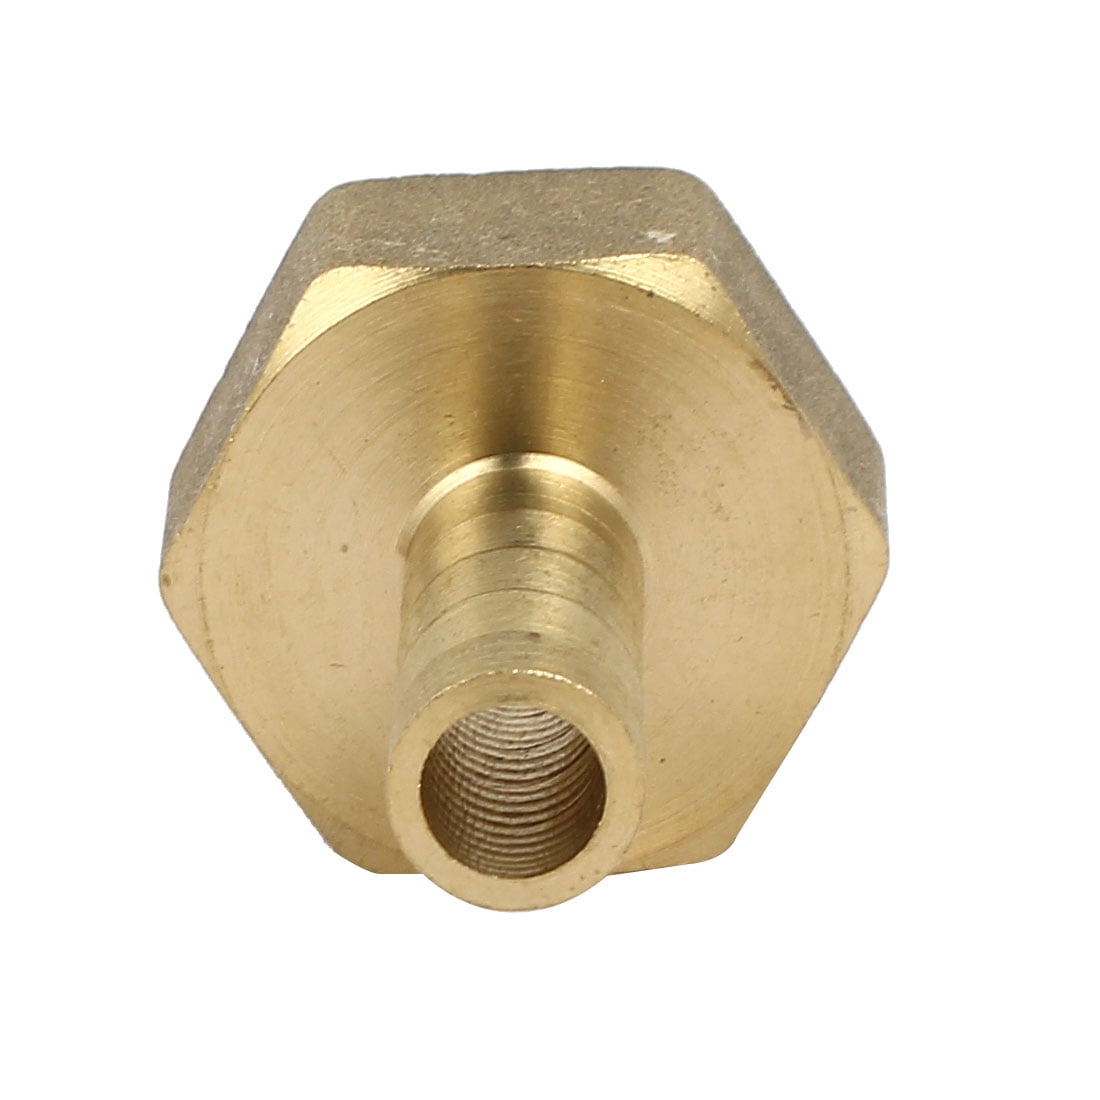 G3/4 Female Thread 10mm Dia Brass Barb Type Hose Tubing Fittings Connectors 2pcs 